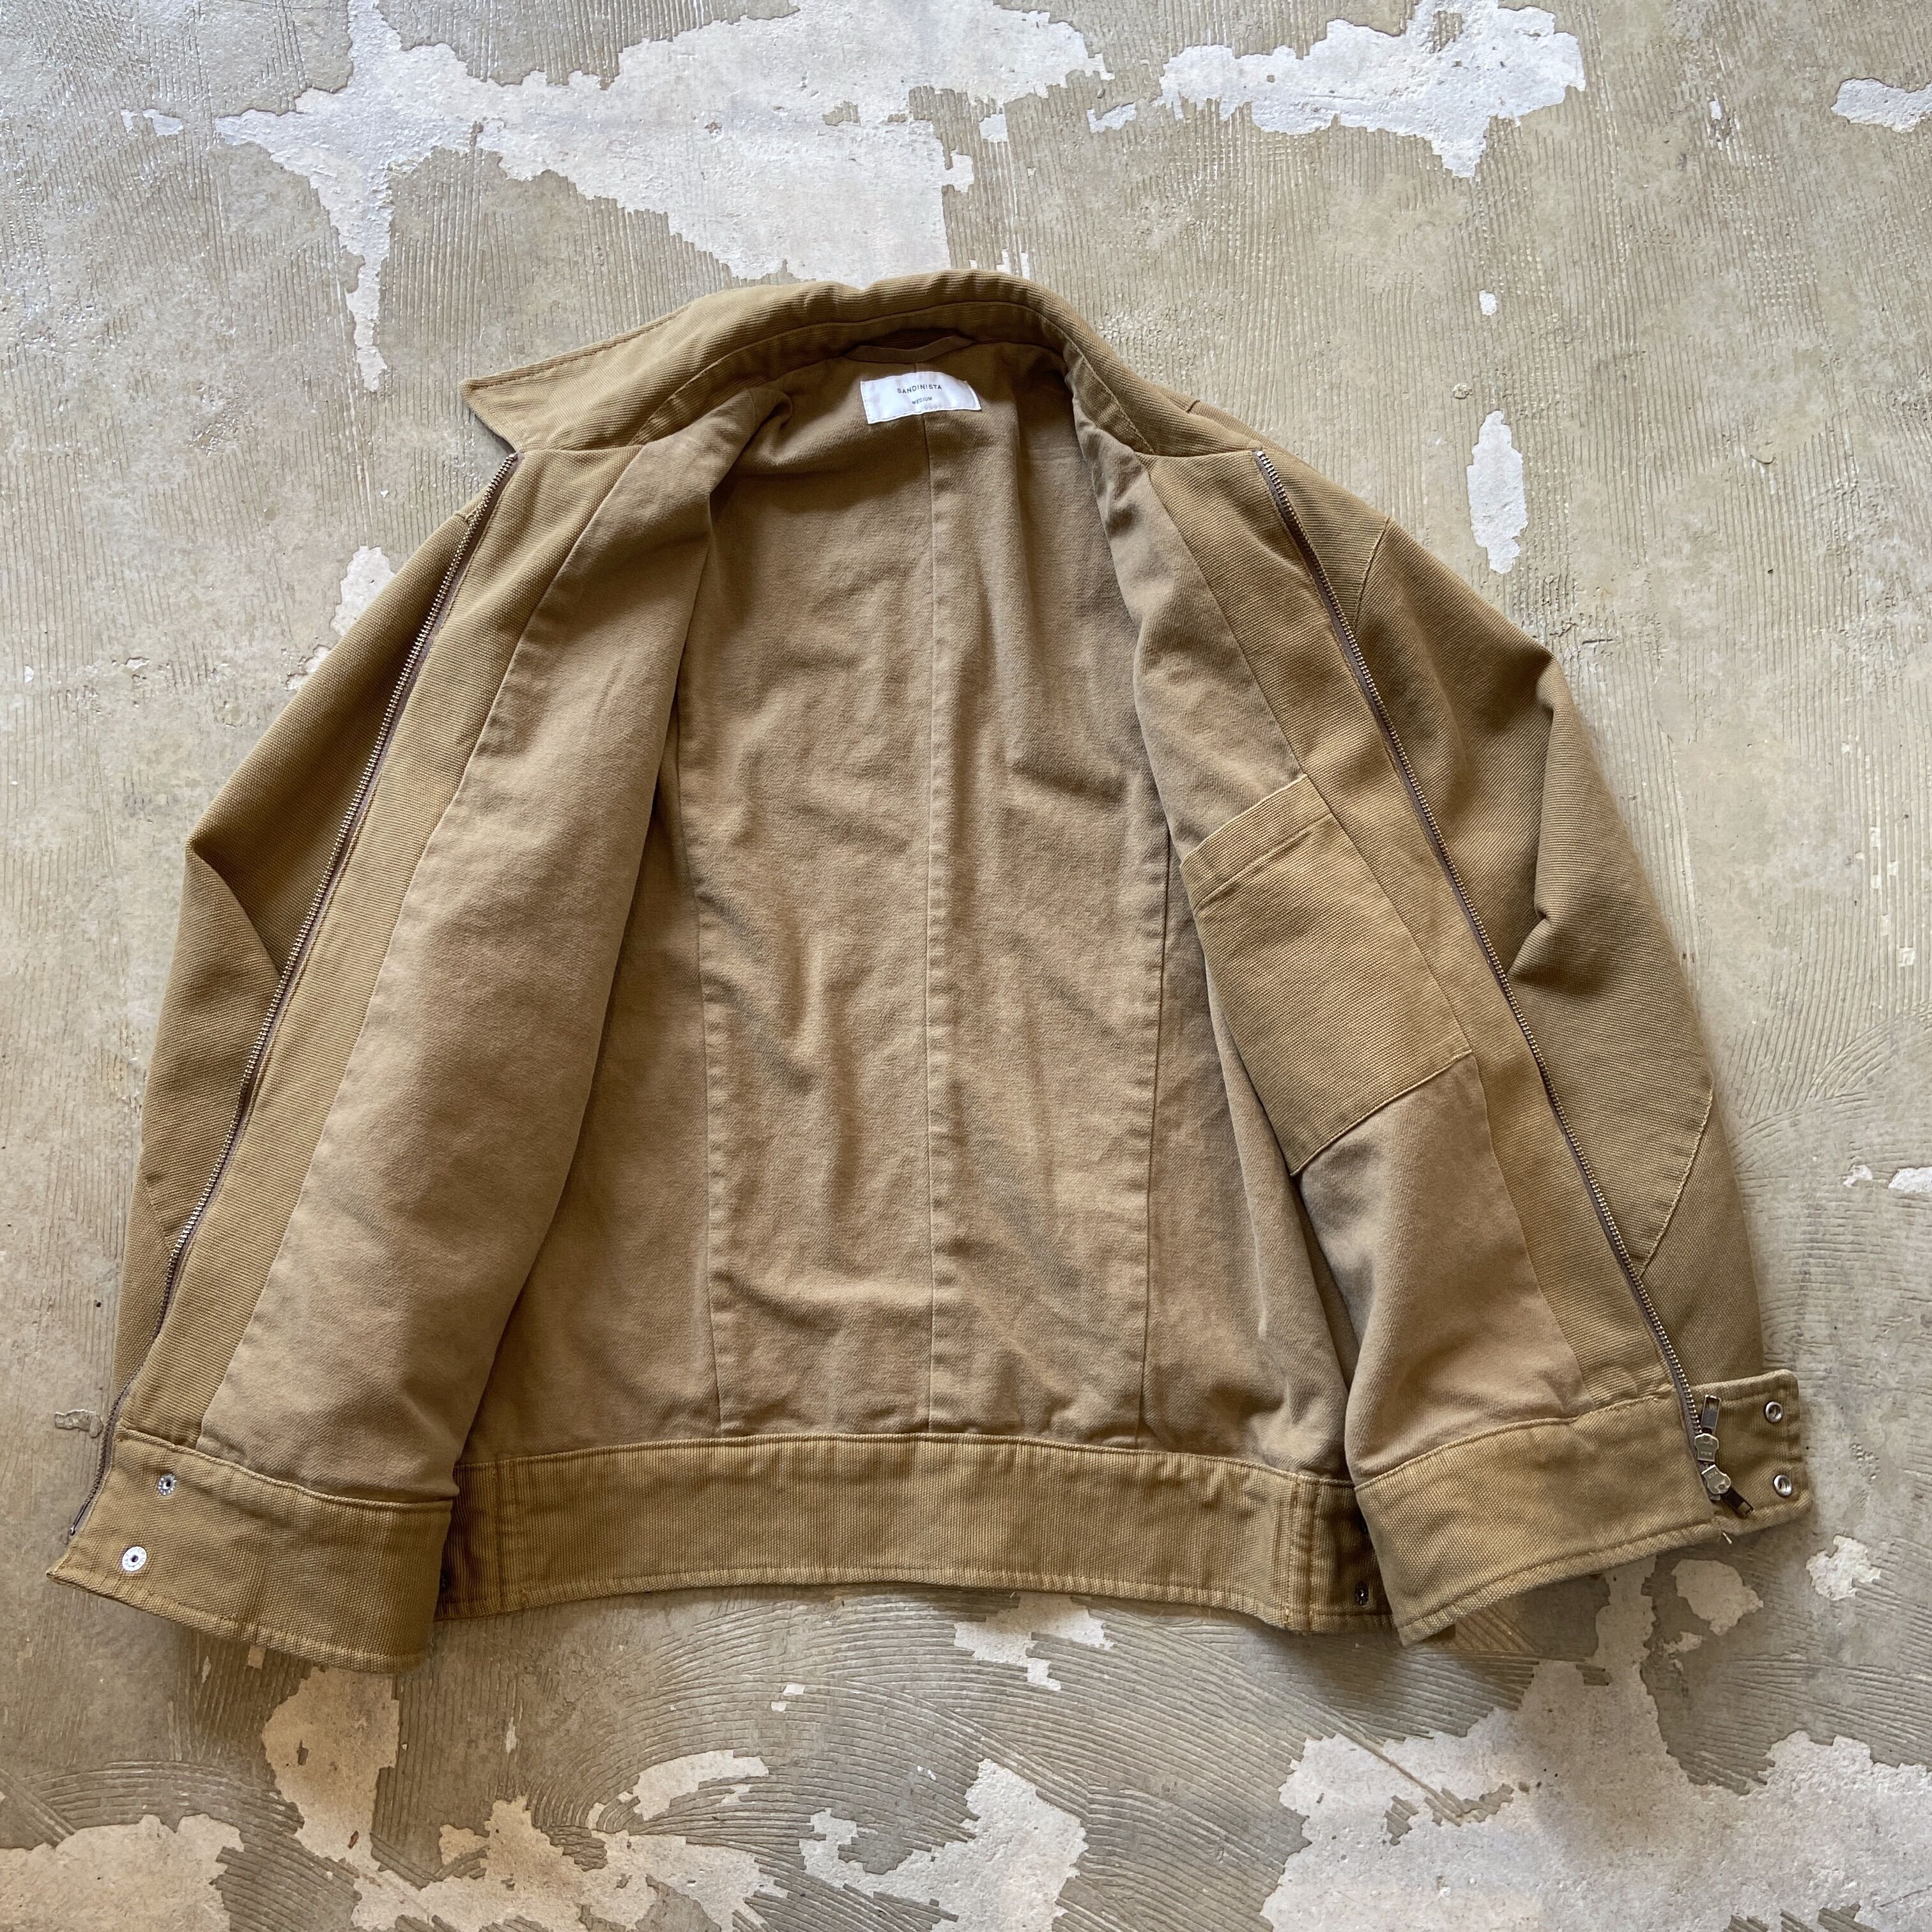 SANDINISTA ” American OX Drizzler Jacket